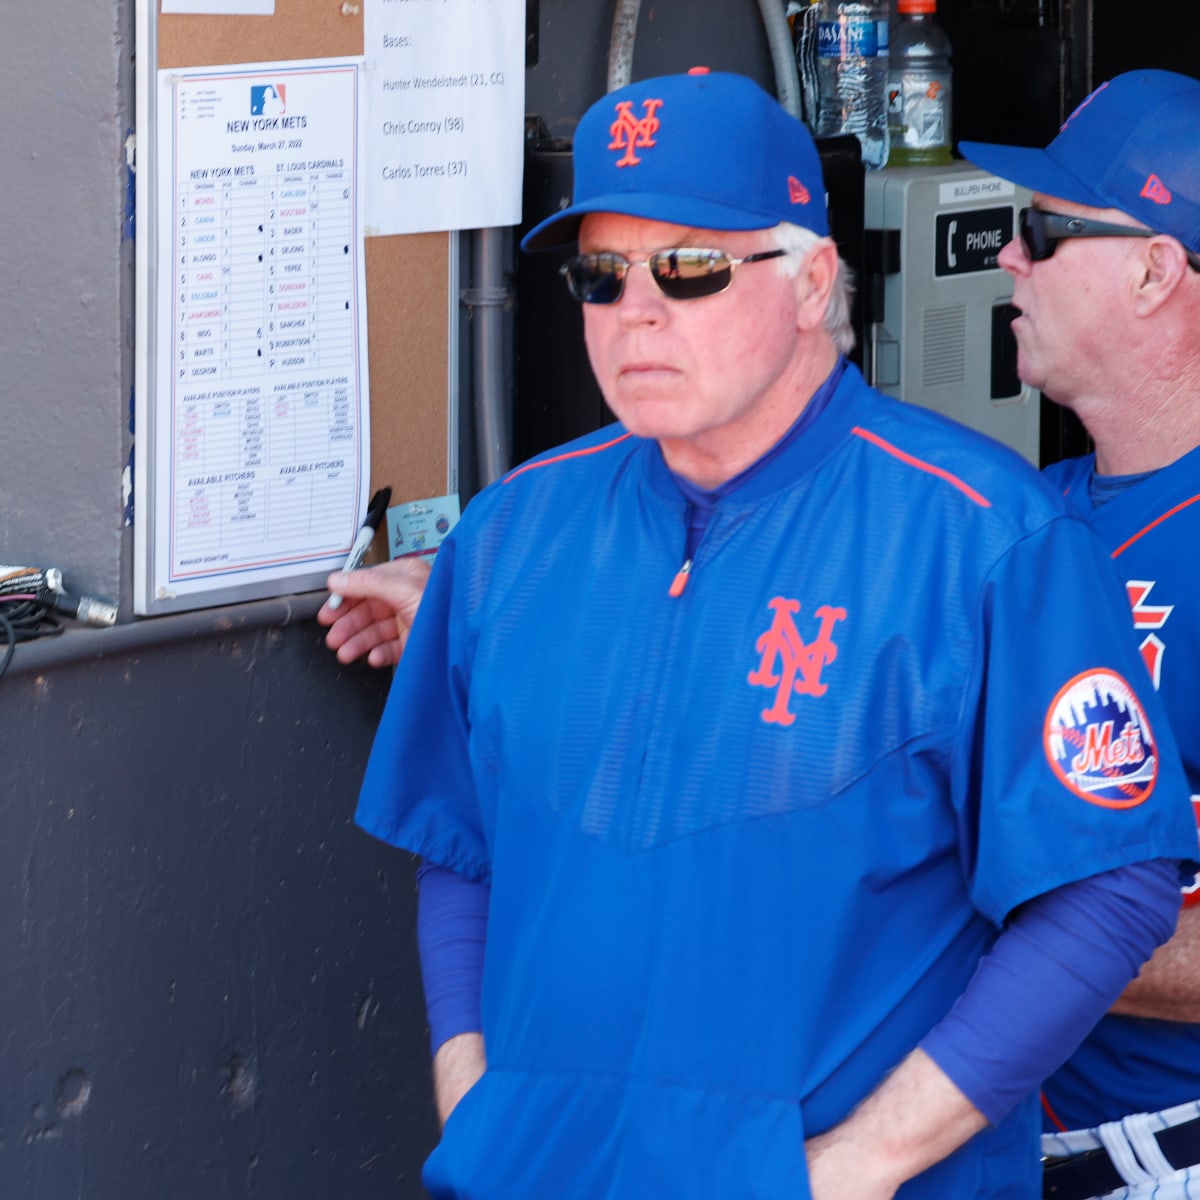 Five candidates to replace Buck Showalter as the next manager of the Mets